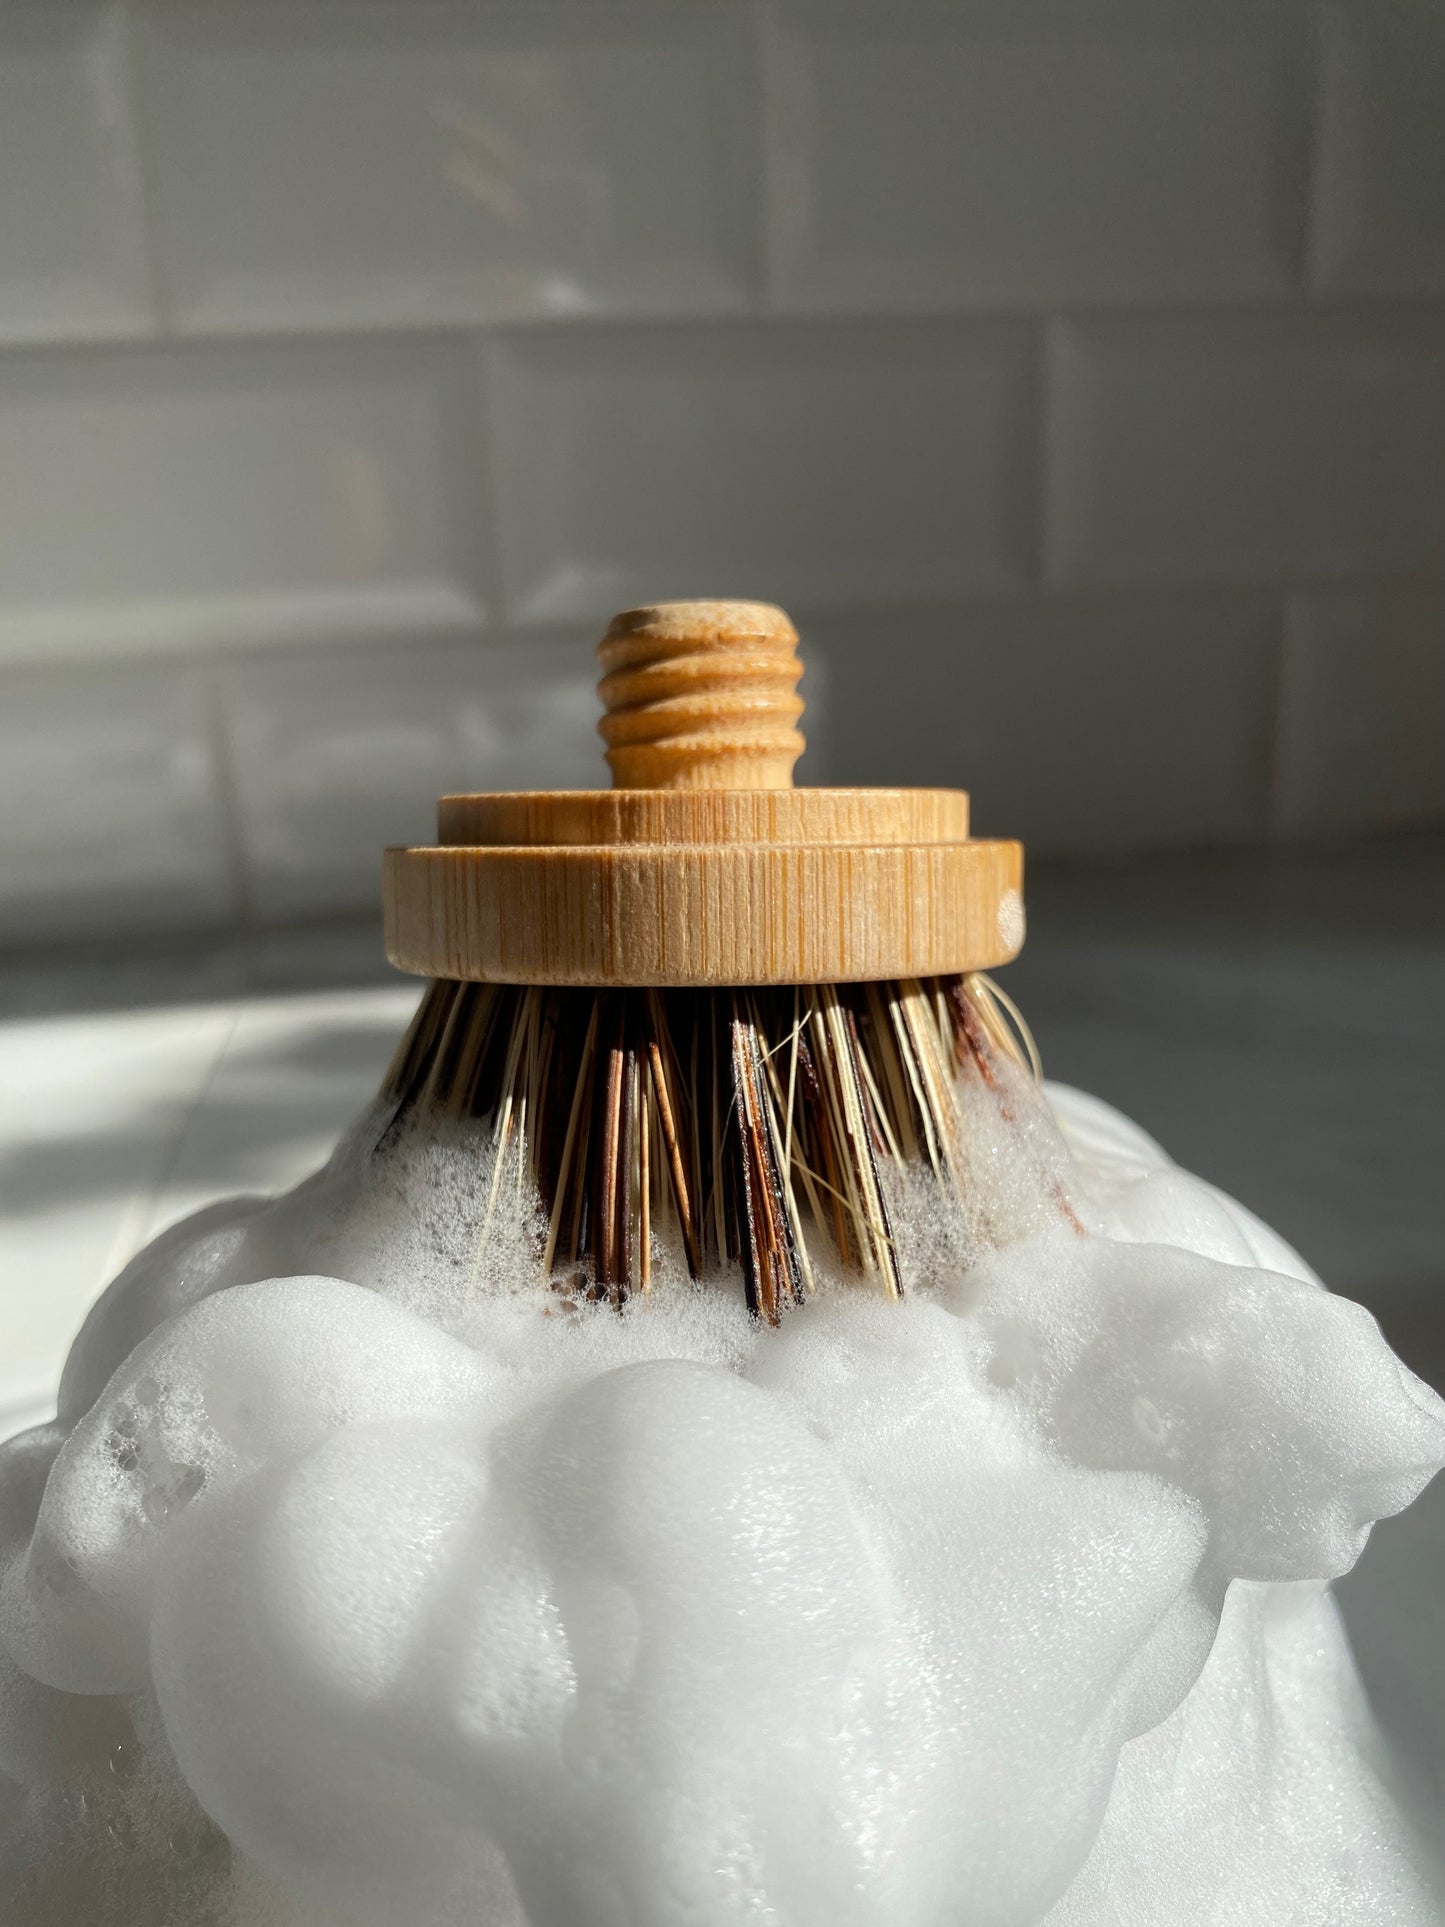 0wastecleaning brush Replacement brush head Replacement brush head - Forever scrubber zero waste-sustainable-refill tablet  magasin zero dechet a Montreal vegan cleaner-pet friendly cleaner